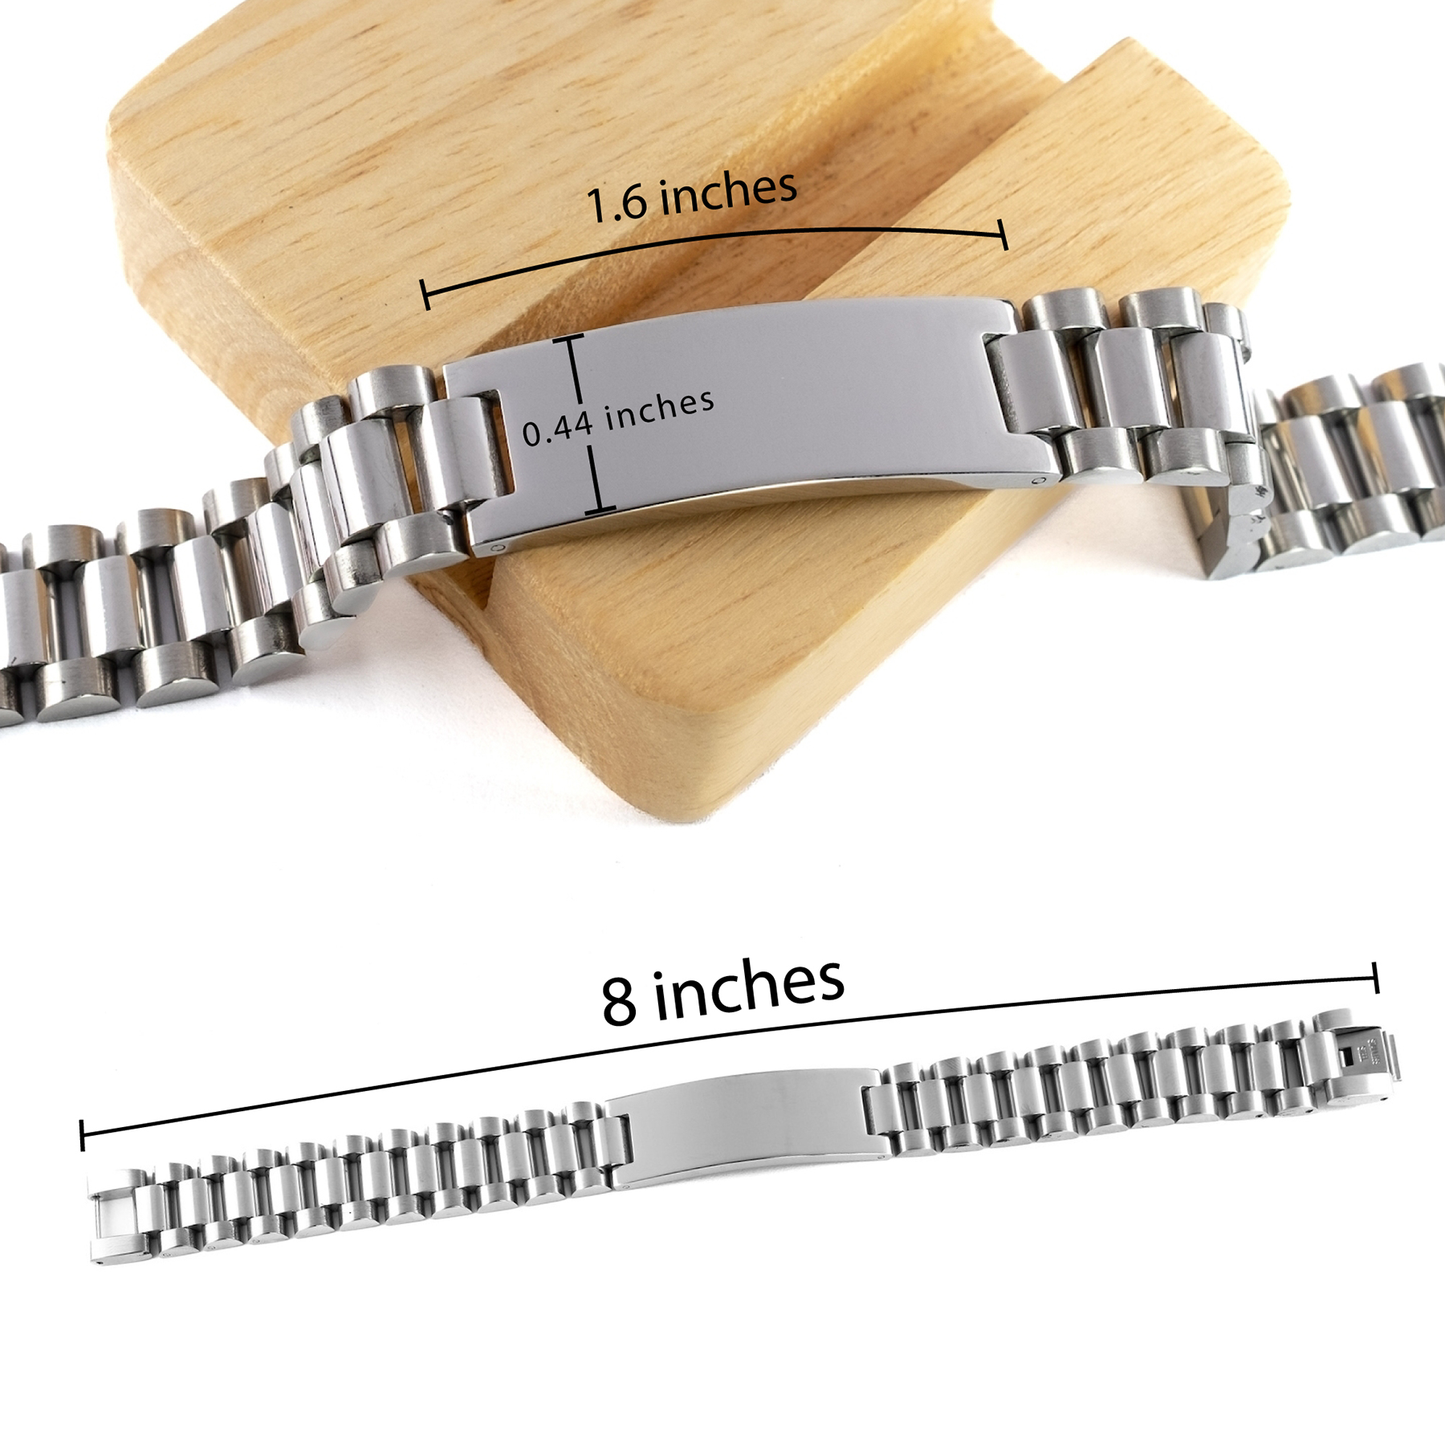 Godson Motivational Gifts from Godmother, Remember to never give up no matter what, Inspirational Birthday Ladder Stainless Steel Bracelet for Godson